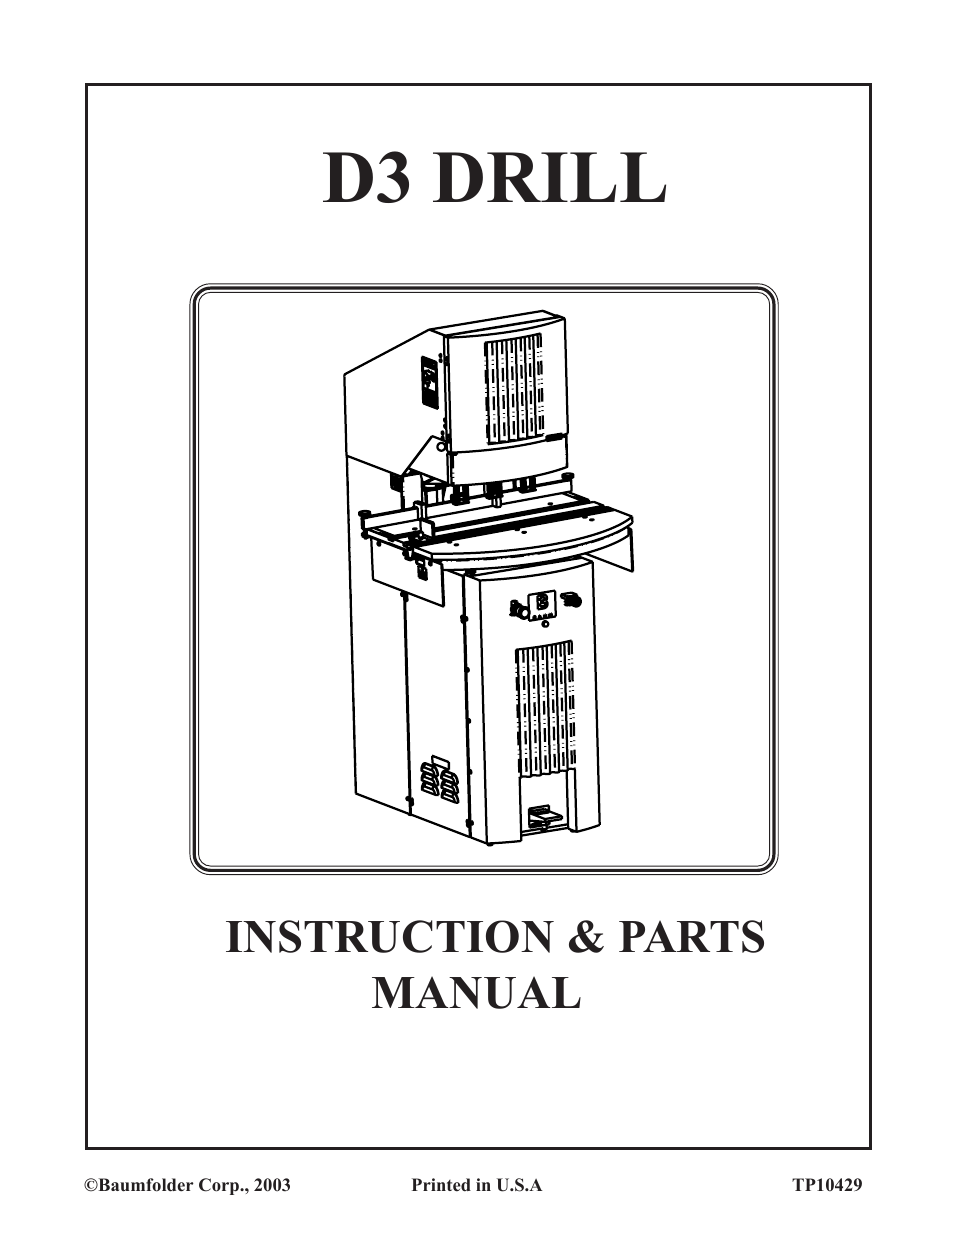 D3 Drill (up to mid 2003)